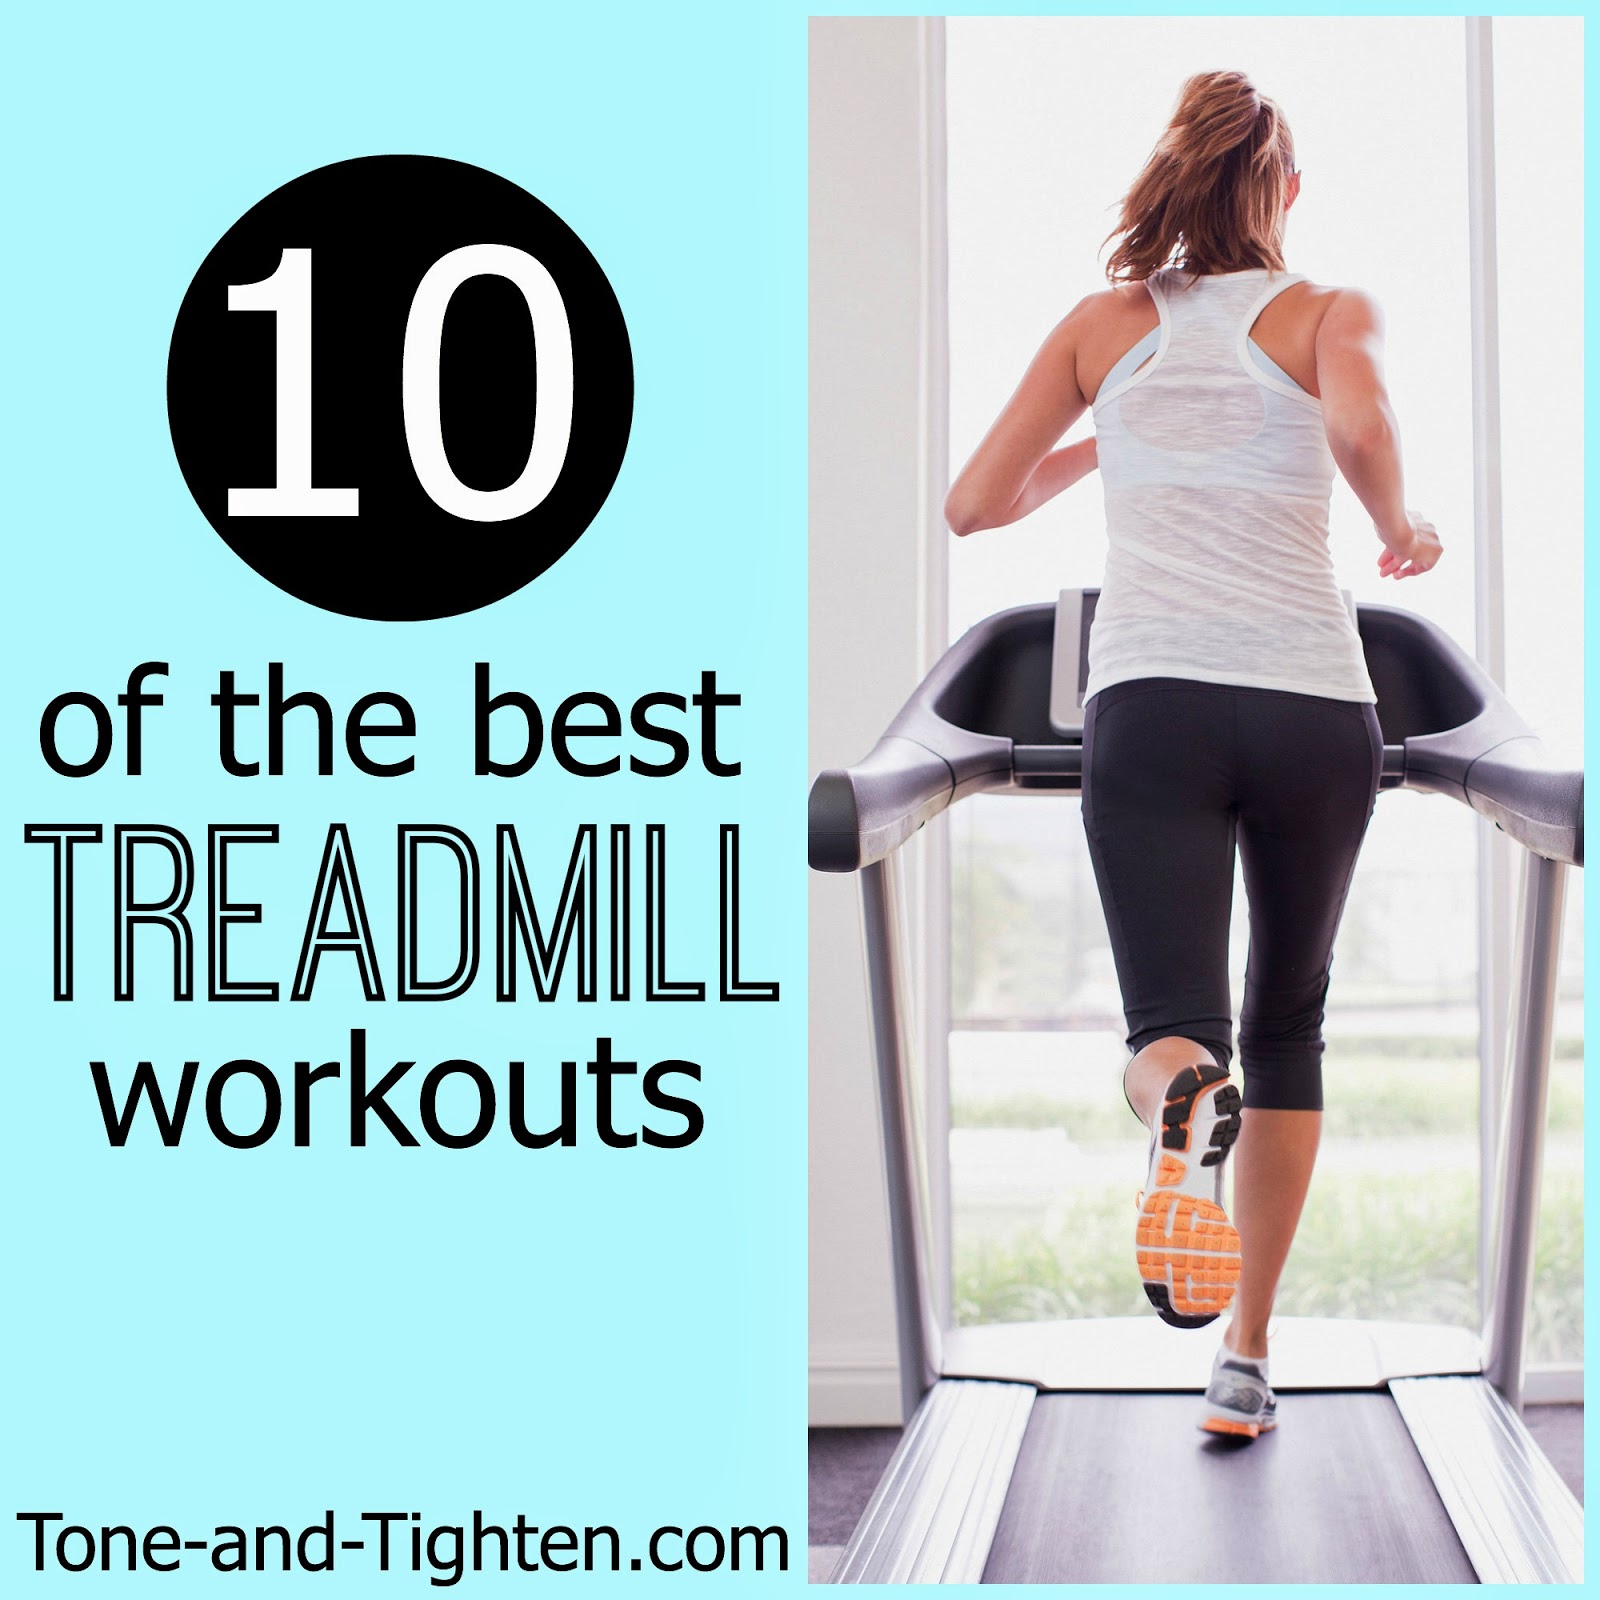 10 of the Best Treadmill Workouts